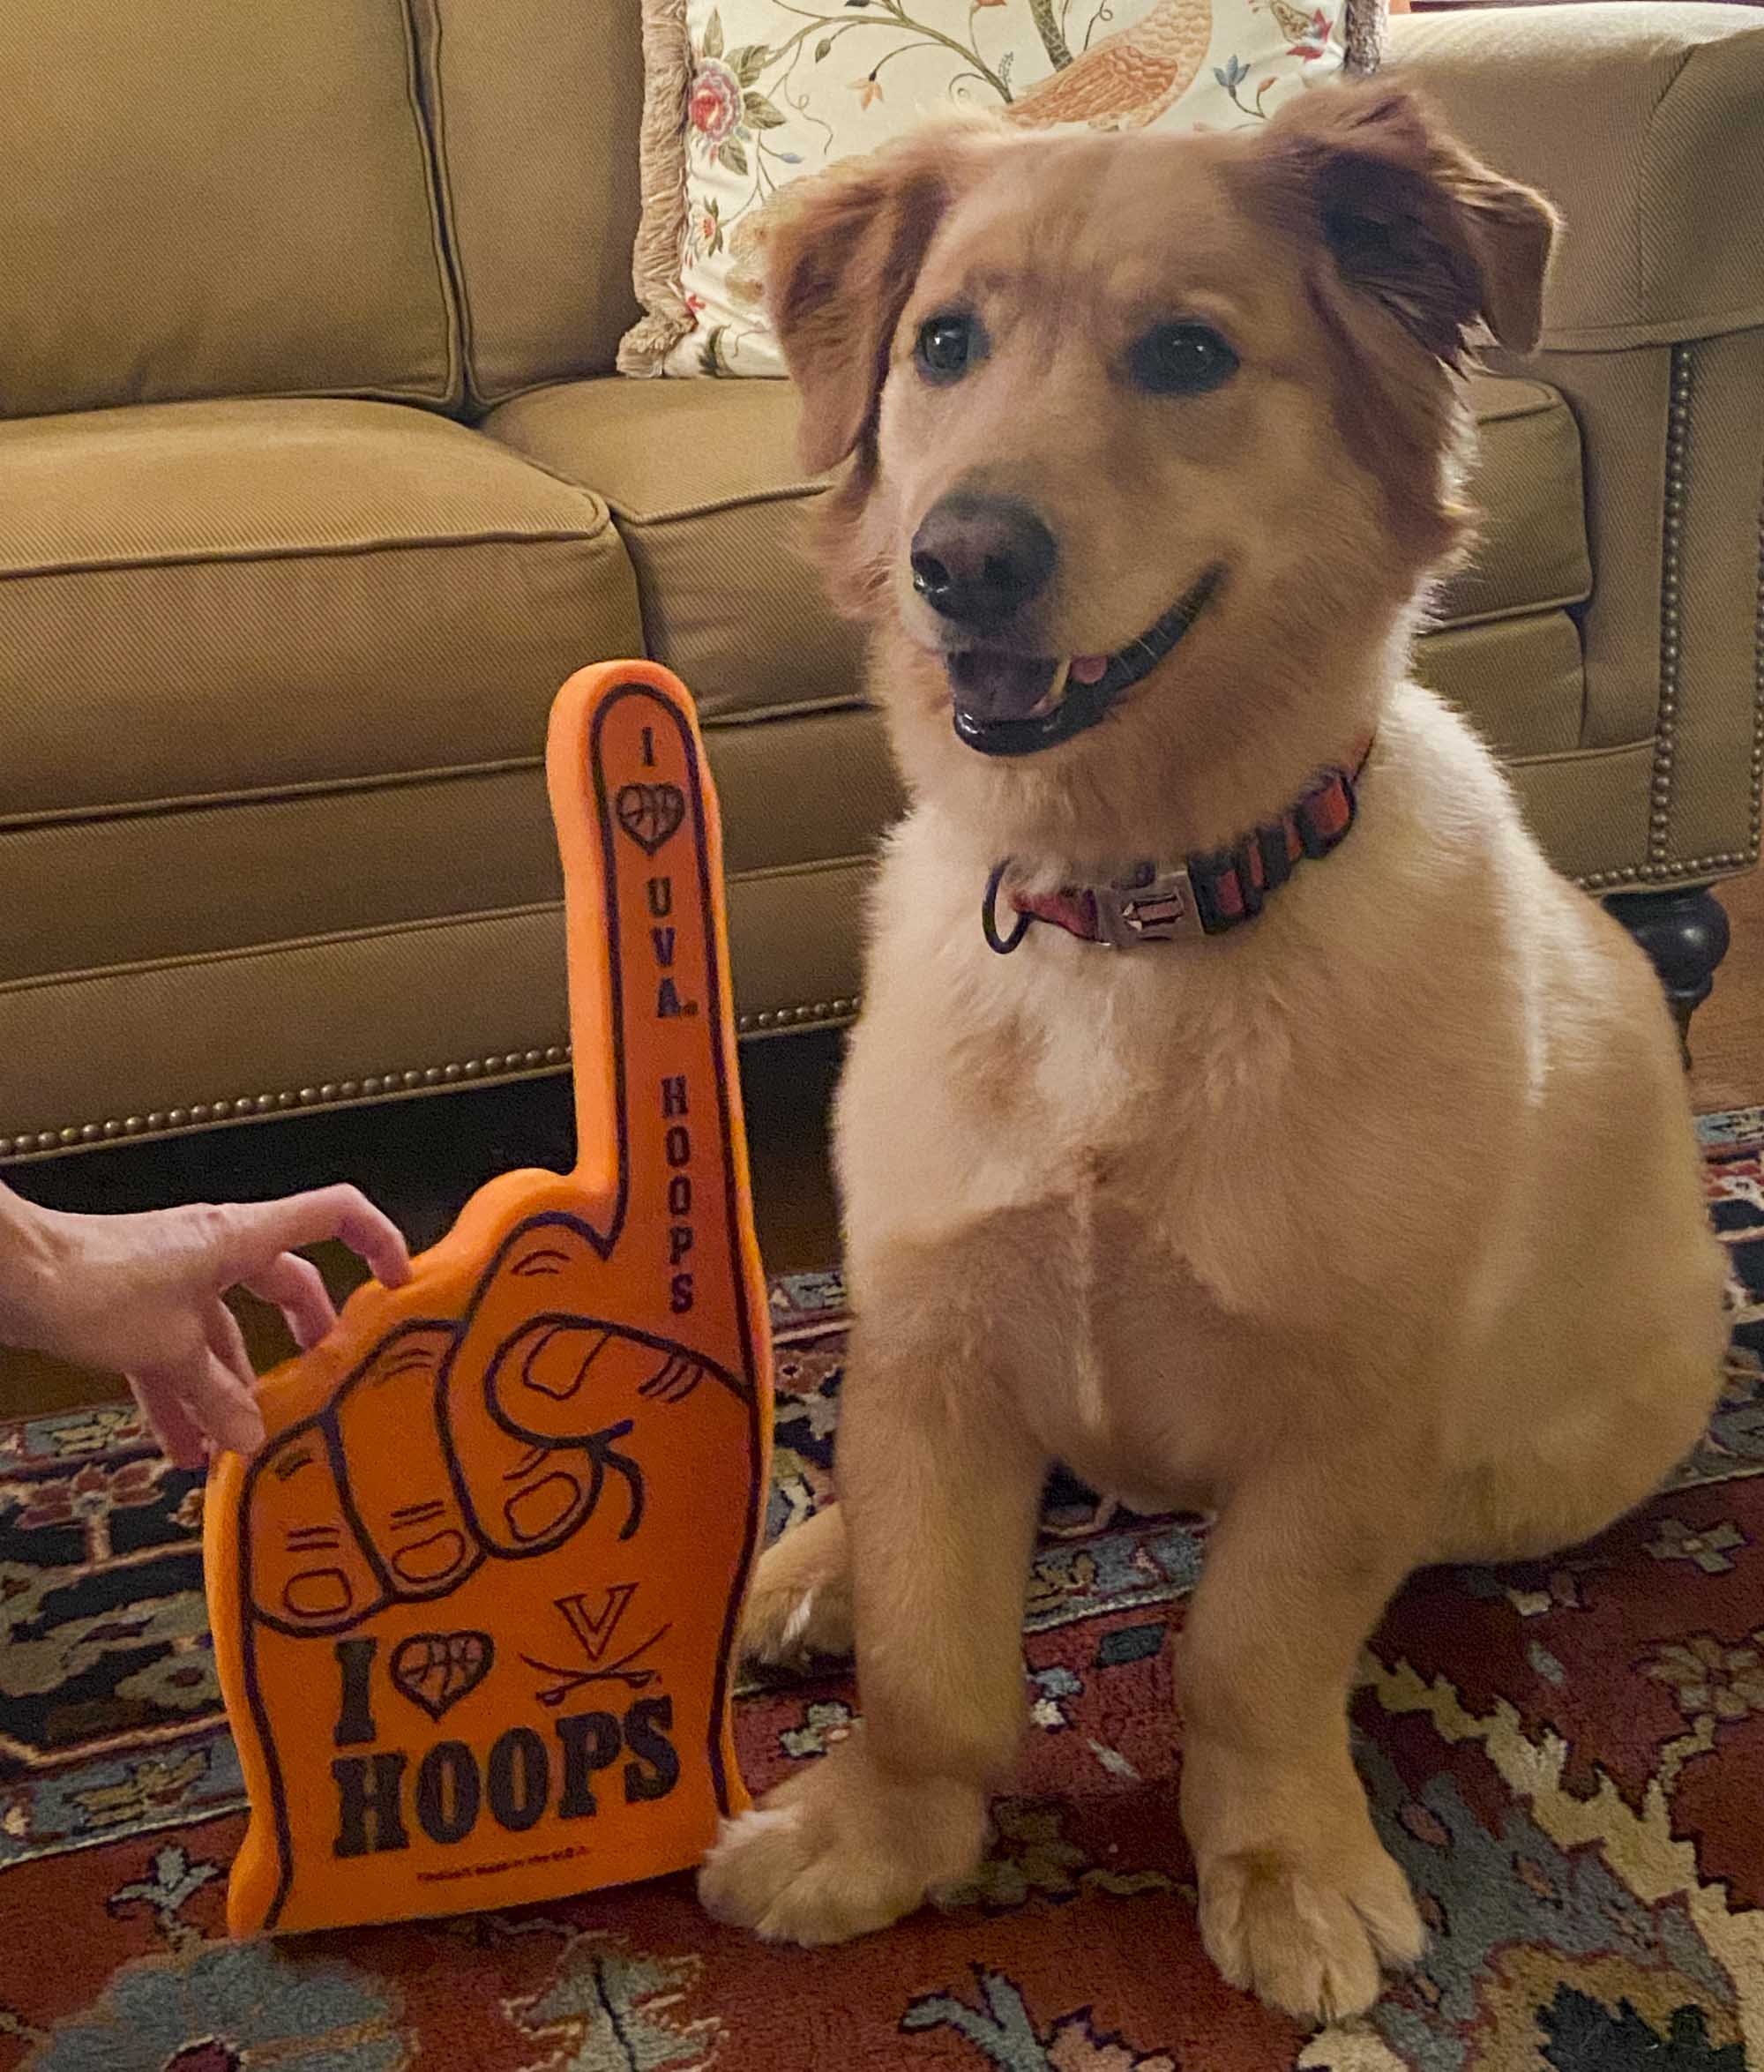 A fuzzy dog with short legs sits next to an orange foam hand